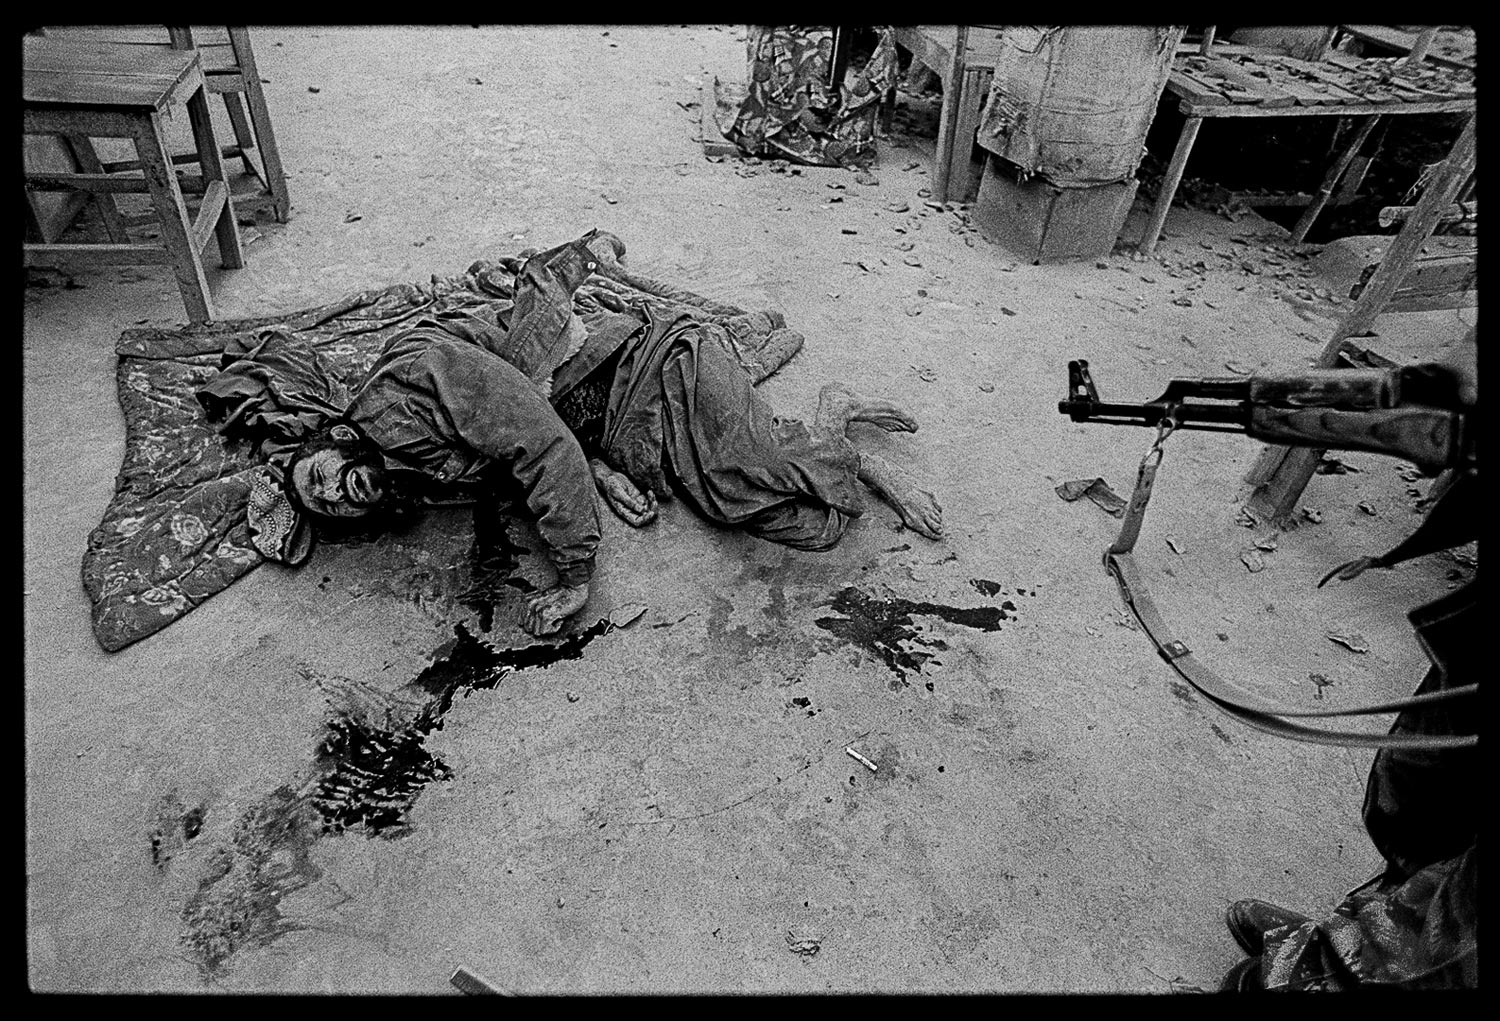 James Nachtwey, November 22, 2001
                               The carefully negotiated hand-over of the city of Kunduz might be as good a reference as any to comprehend the reality of peace agreements in Afghanistan. Located in the north, near Uzbekistan, Kunduz was the last major stronghold of the Taliban following its withdrawal from Kabul. It had been under siege by the Northern Alliance, and an agreement was forged in which Taliban fighters would surrender in exchange for safe passage, and the city would be occupied by the alliance.
                              
                              For a couple of days, the Taliban began to drive out to their enemy’s lines and relinquish their weapons. On the appointed day, a large convoy of Northern Alliance troops moved forward. As it entered the city center, the remaining Taliban fighters opened fire from every direction. Chaos ensued. Both incoming and outgoing fire, from assault rifles, machine guns and rocket propelled grenade launchers was so dense and haphazard, one was as dangerous as the other, no matter which side you happened to be on. It was impossible to figure out where to take cover. Survival would be a matter of luck, and every moment carried the expectation of being hit.
                              
                              When the shooting was finished, the dead and dying were scattered about the streets. This Taliban fighter had been shot in the stomach and was slowly and painfully slipping away. The peaceful hand-over was later trumped by the guarantee of safe passage, in which dozens of Taliban who had turned themselves in were suffocated to death in the shipping container that was supposedly being used to transport them to a secure location.